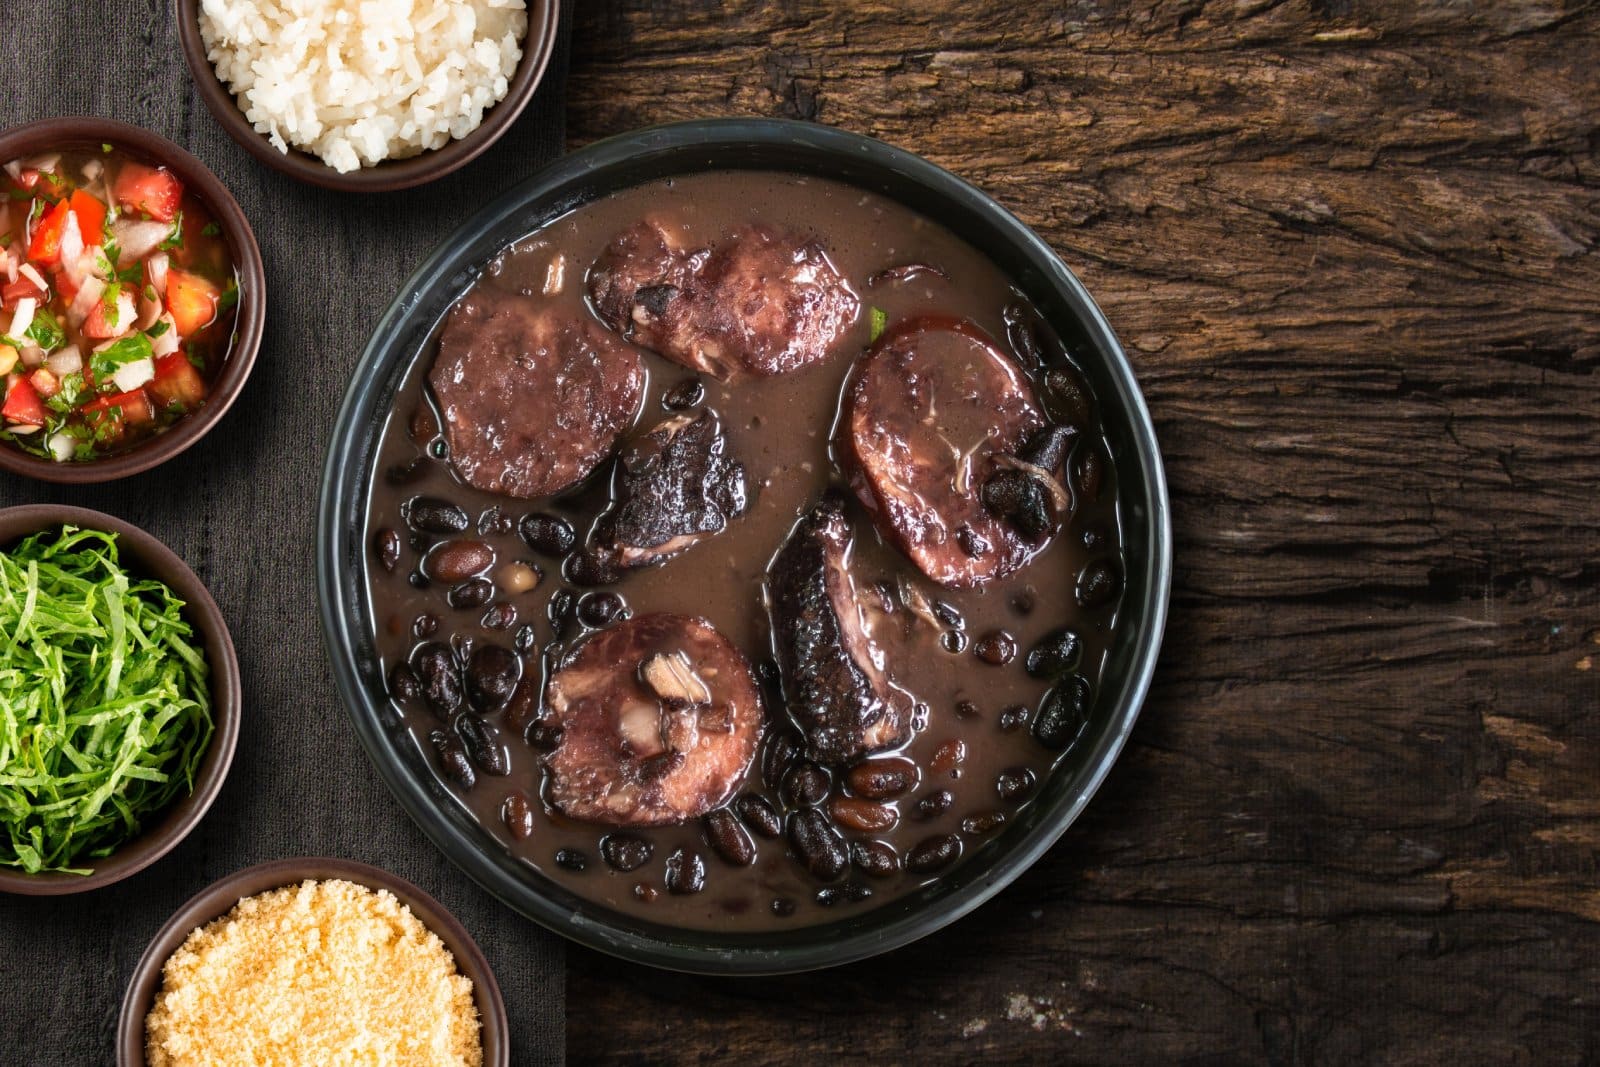 Image Credit: Shutterstock / gustavomellossa <p><span>A hearty stew of black beans with pork or beef, feijoada is the soul of Brazilian cuisine, reflecting its rich history and cultural diversity.</span></p>